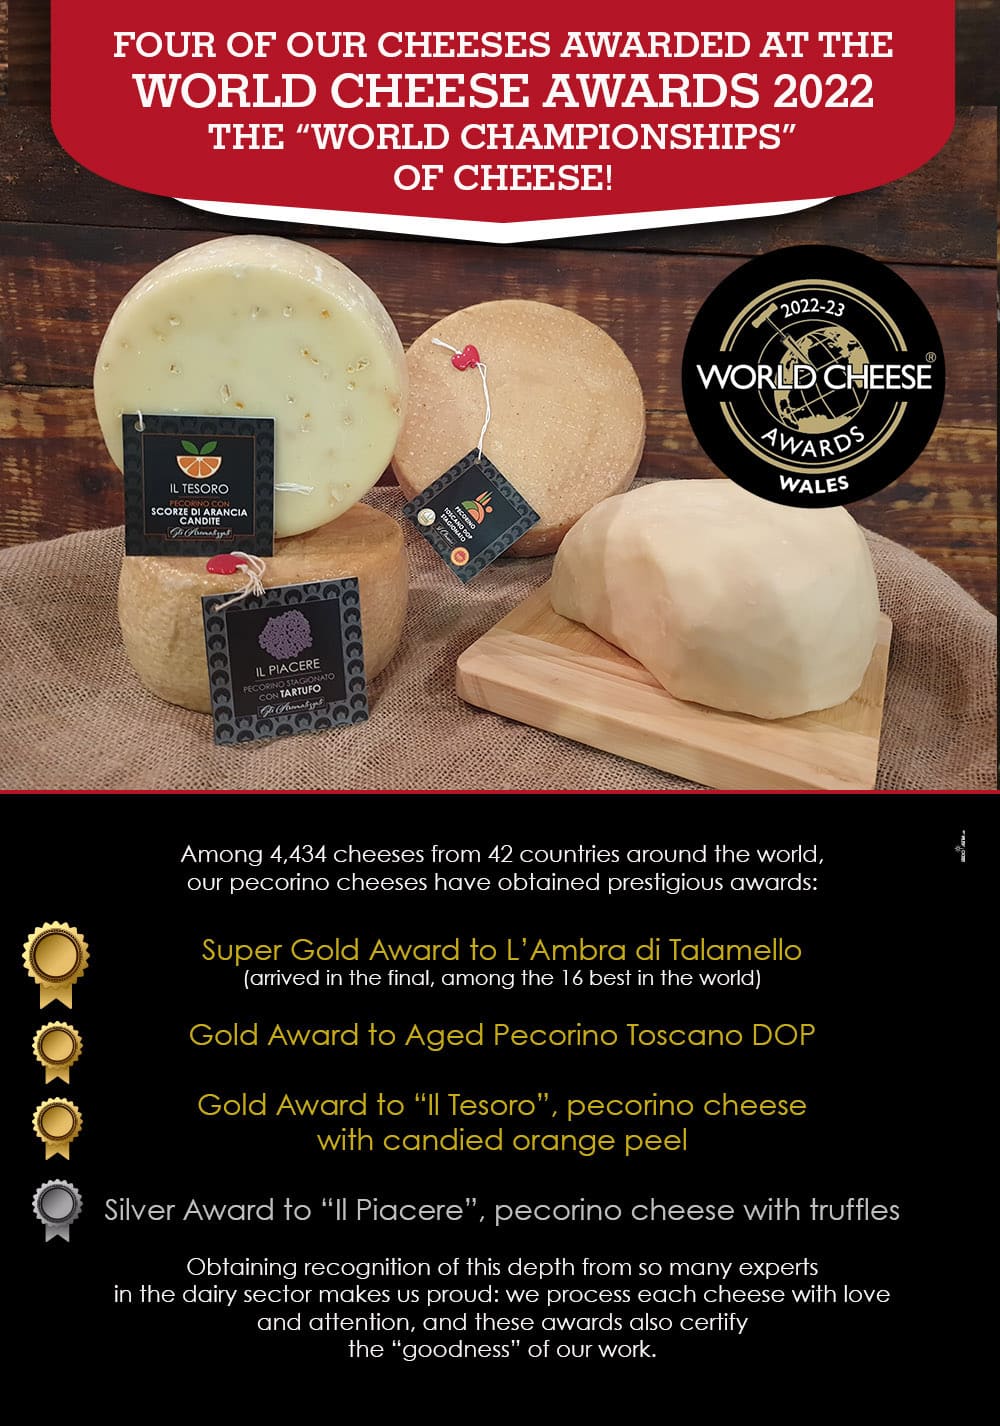 Four Of Our Cheeses Awarded At The World Cheese Awards 2022 The “world Championships” Of Cheese 